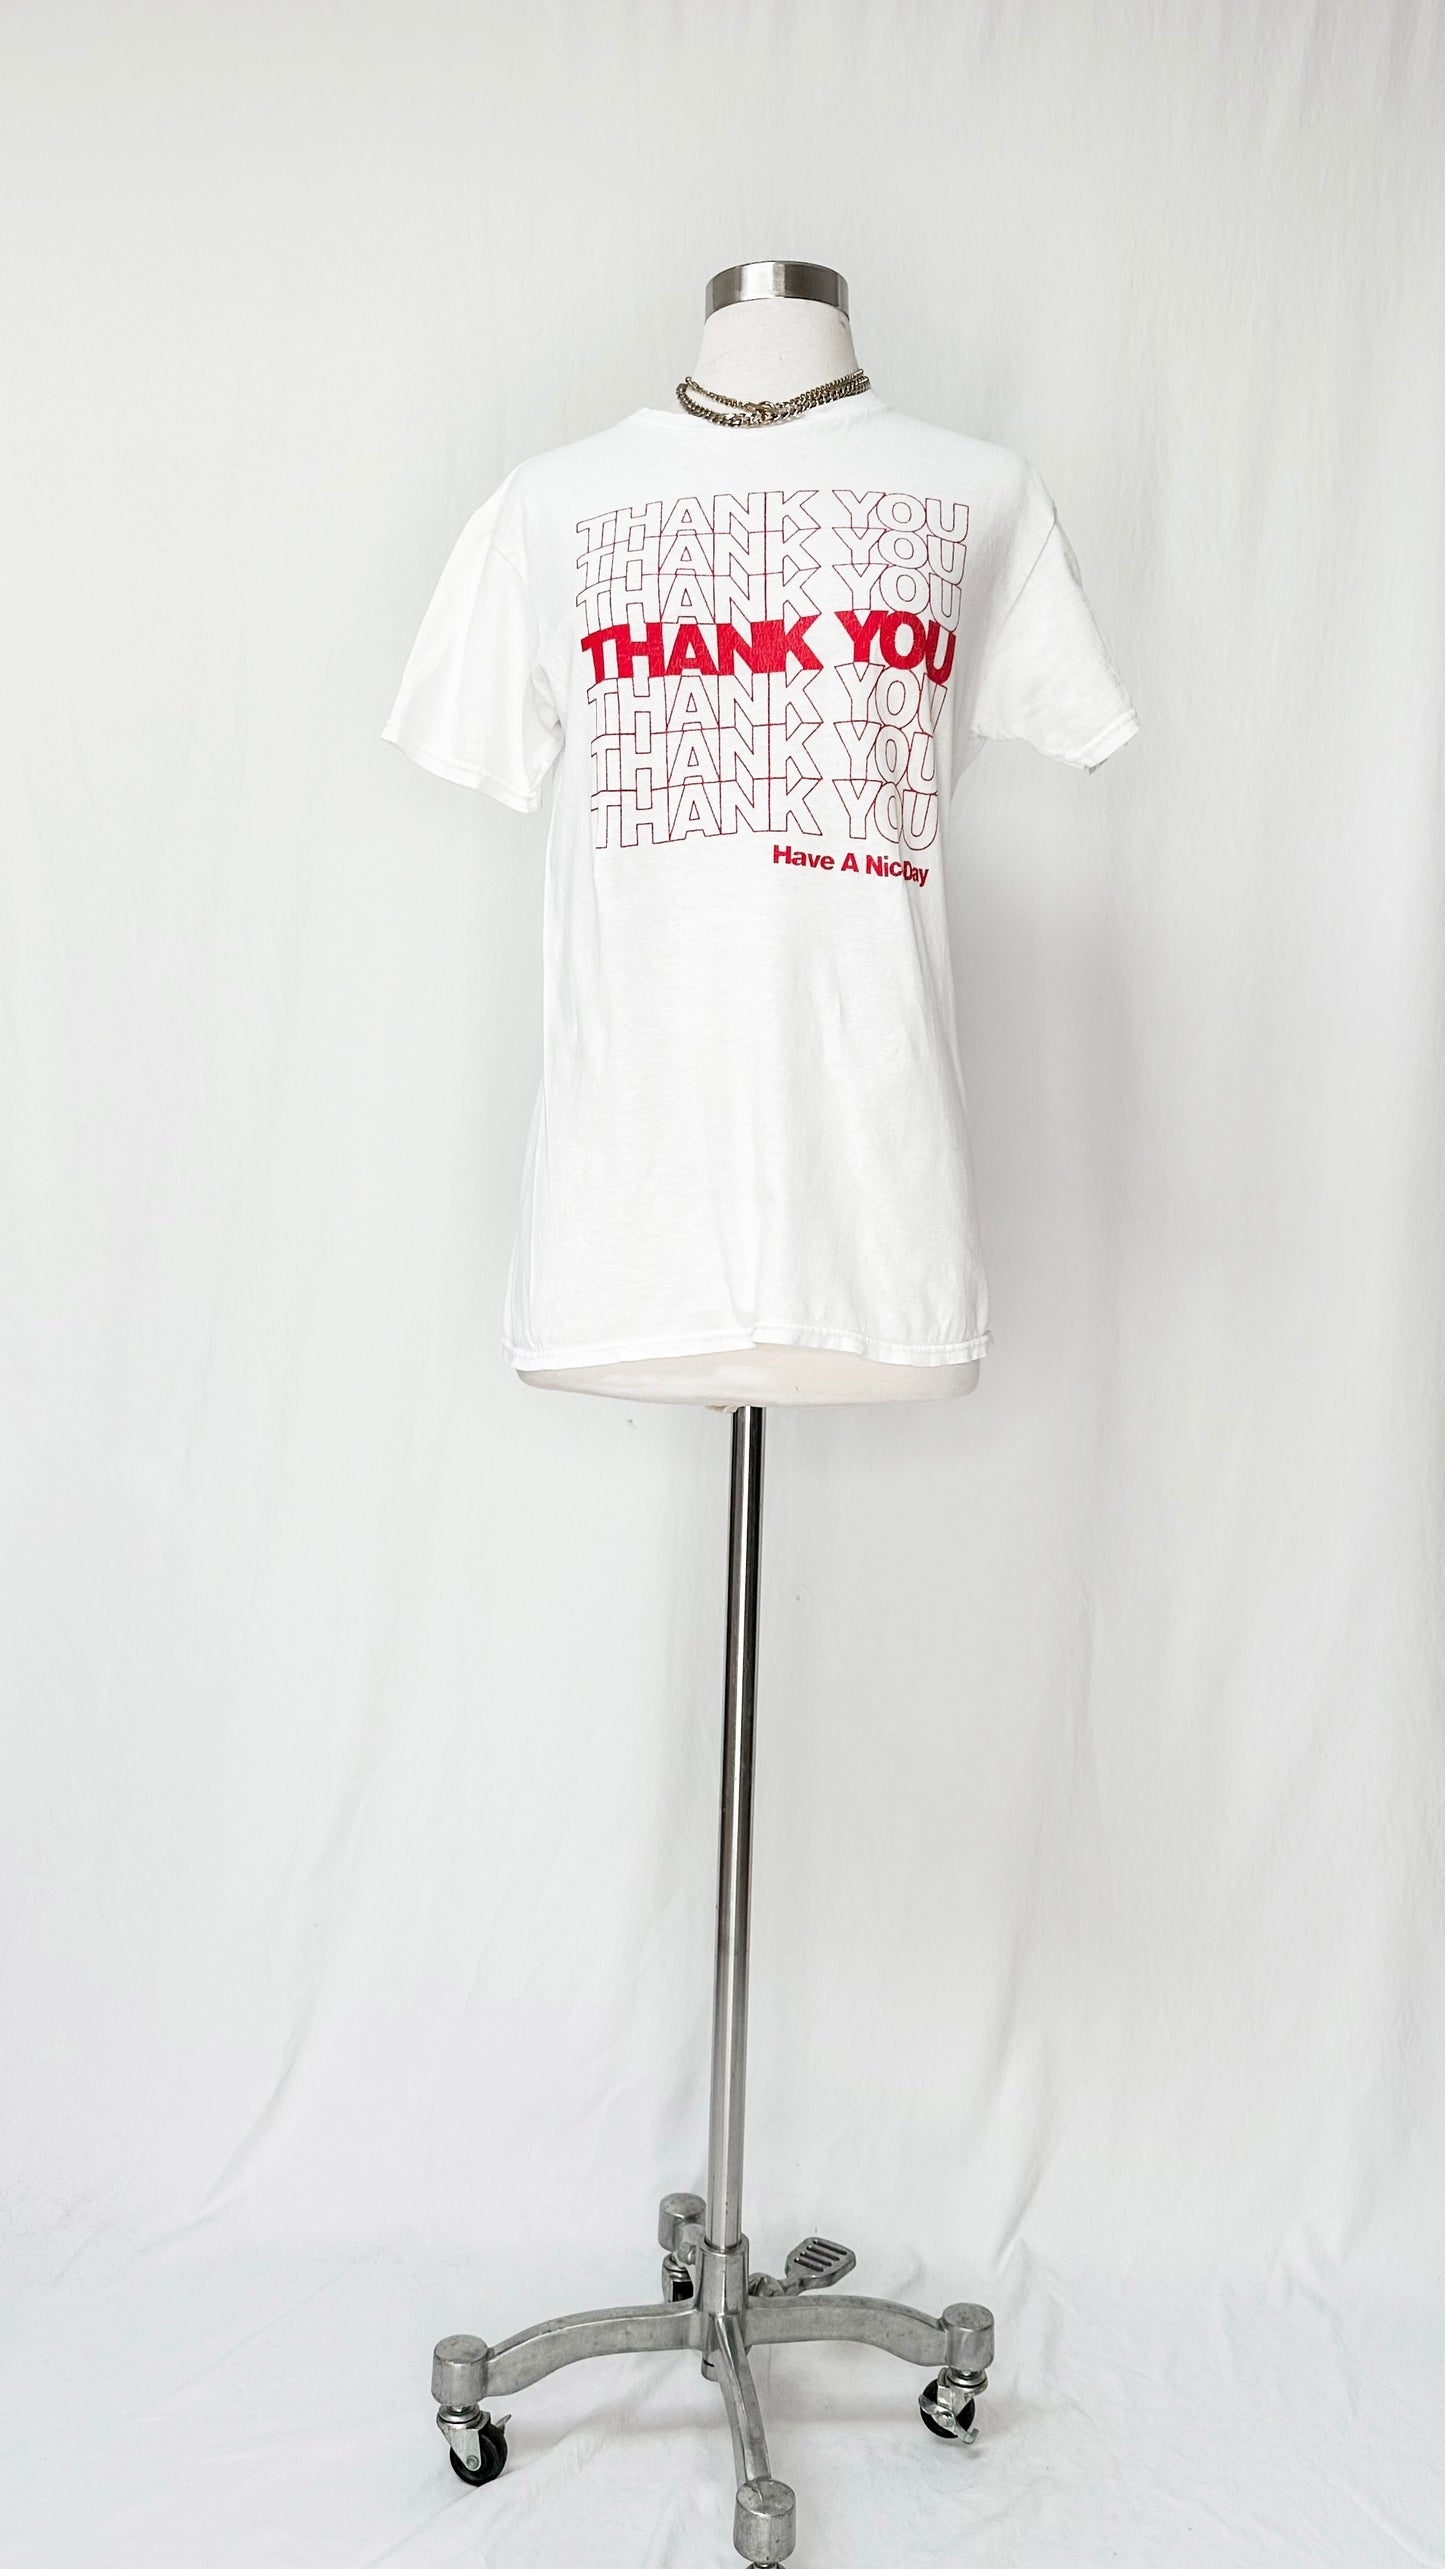 Vintage 90’s Thank You Single Stitch Graphic Tee (S)